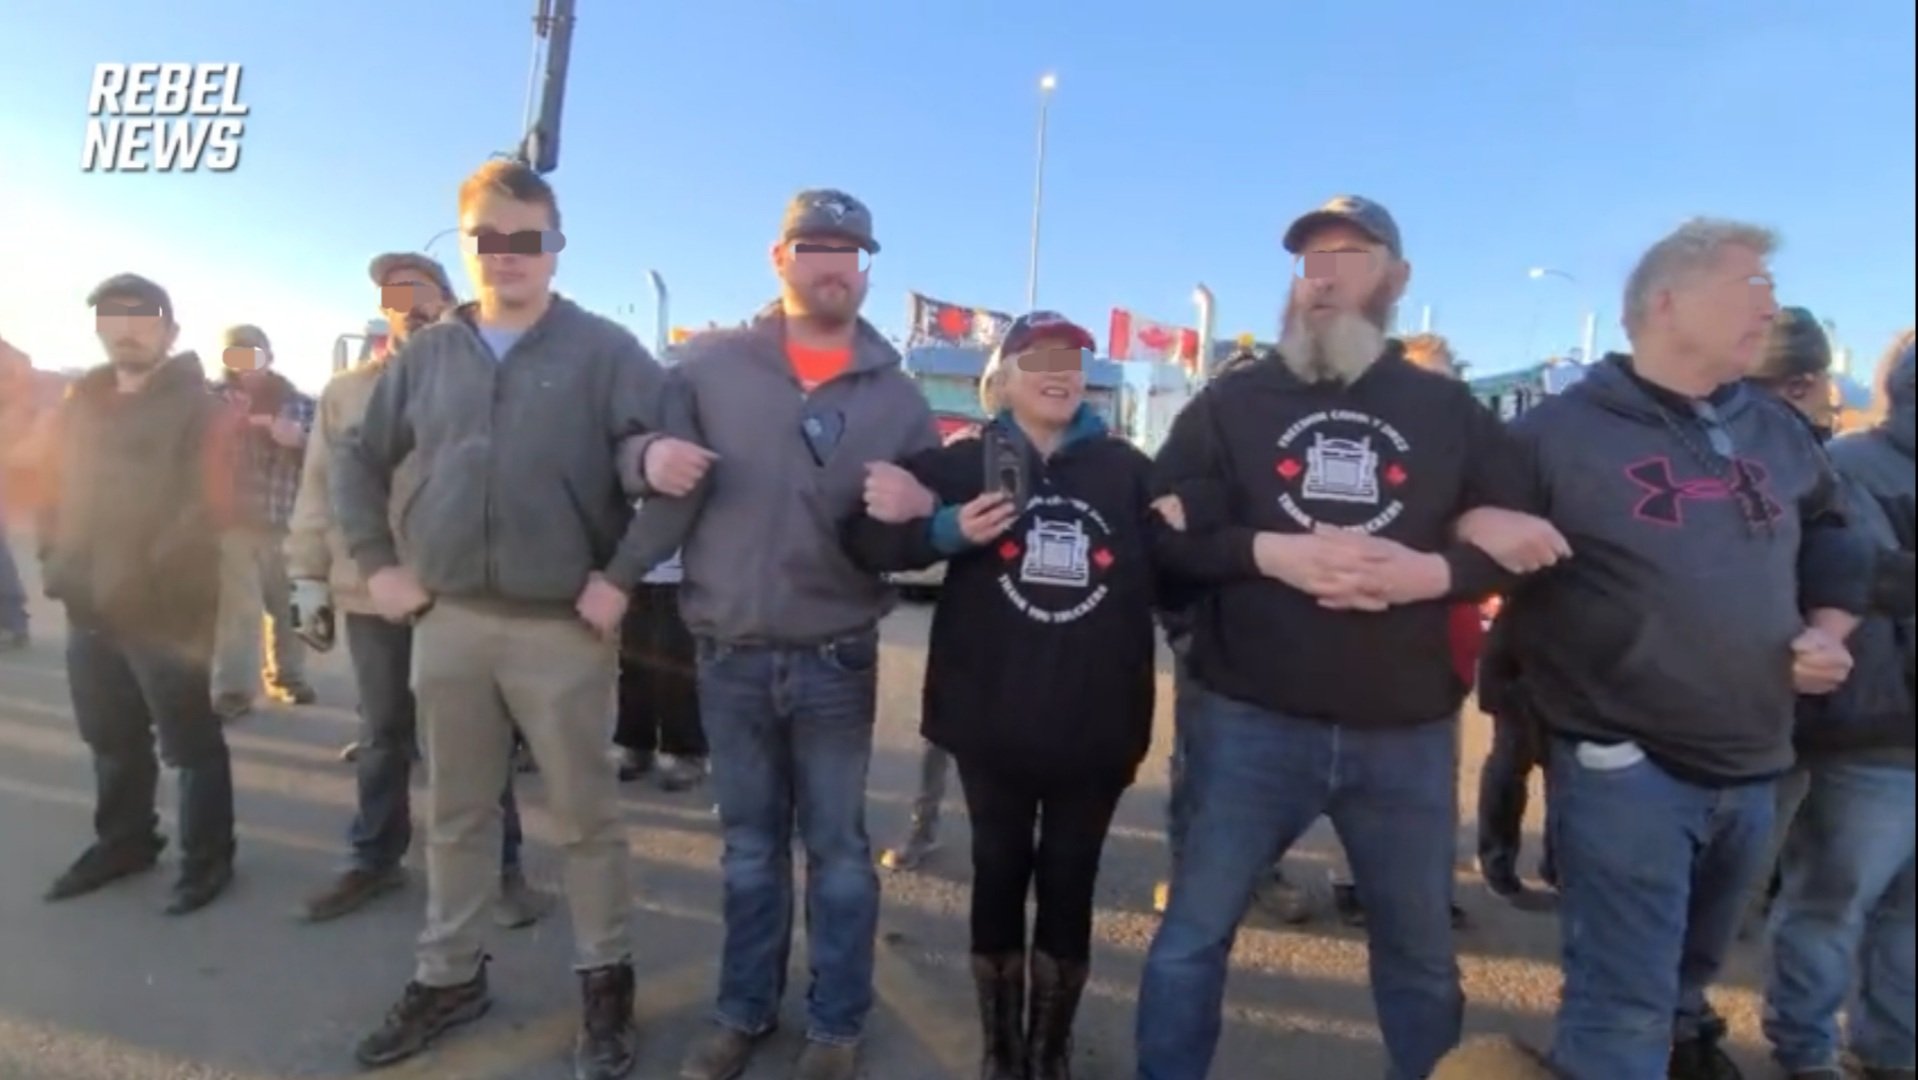  MUST WATCH: Convoy Protesters Near Alberta Border Crossing Unite to Face Down the Police – All Link Arms, Refuse to Budge, When Officers Arrive to Begin Making Arrests (VIDEO)